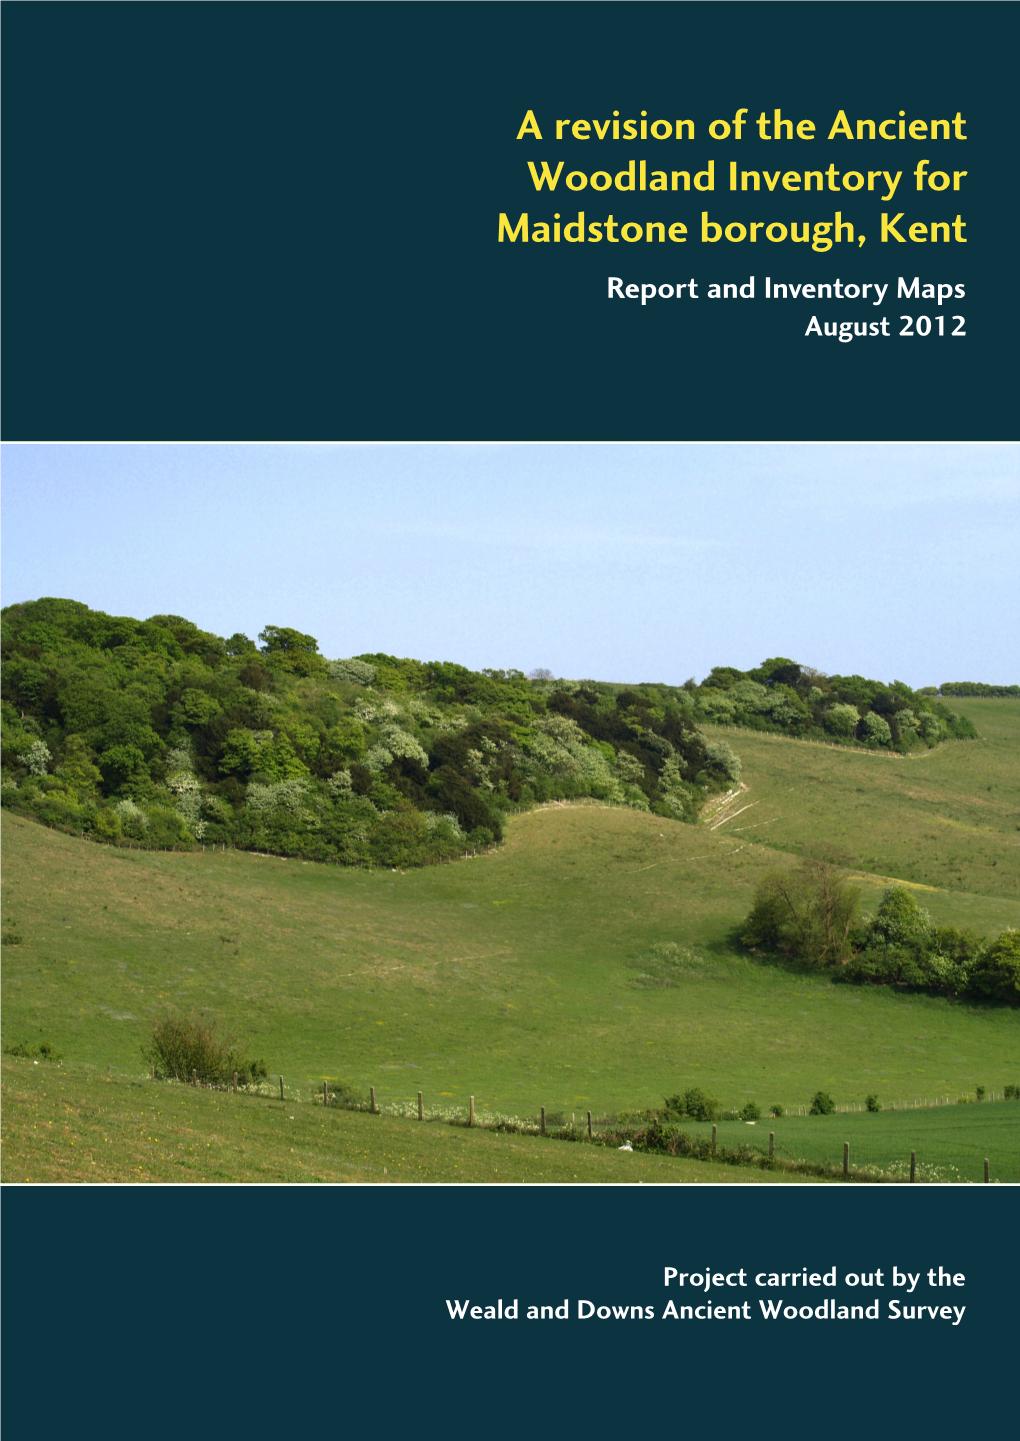 A Revision of the Ancient Woodland Inventory for Maidstone Borough, Kent Report and Inventory Maps August 2012